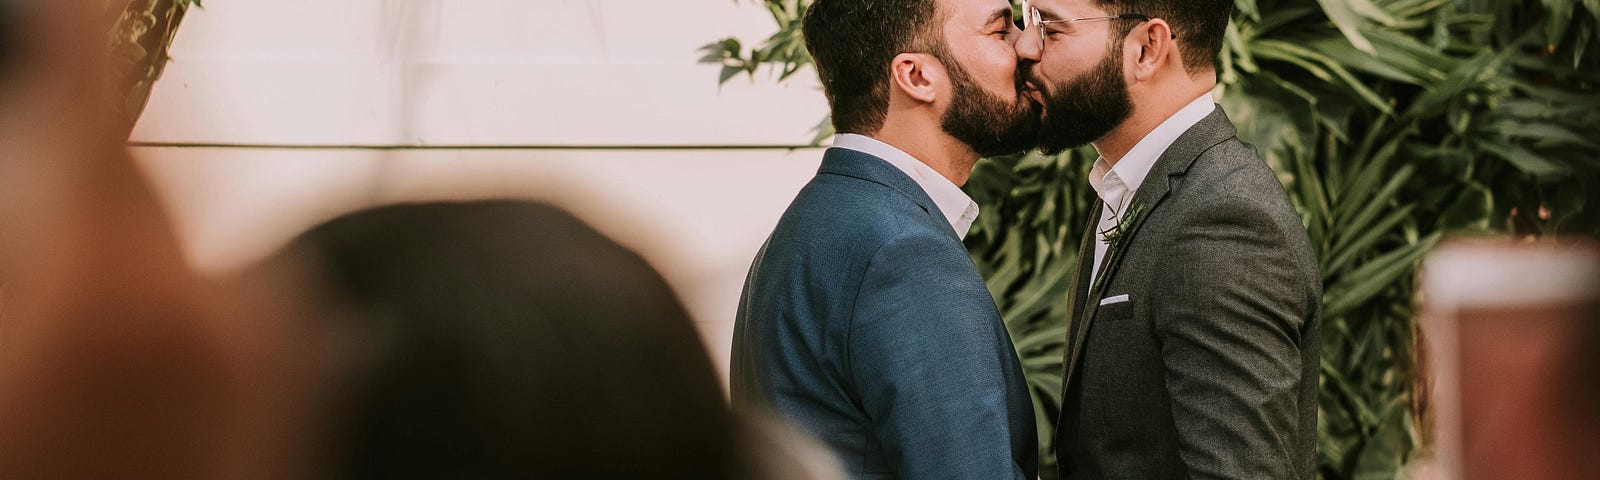 A photo shows two grooms dressed in suits kissing. The grooms are in focus, while the wedding guests who are looking on are shown out of focus and from behind. Behind the grooms is some tropical foliage.